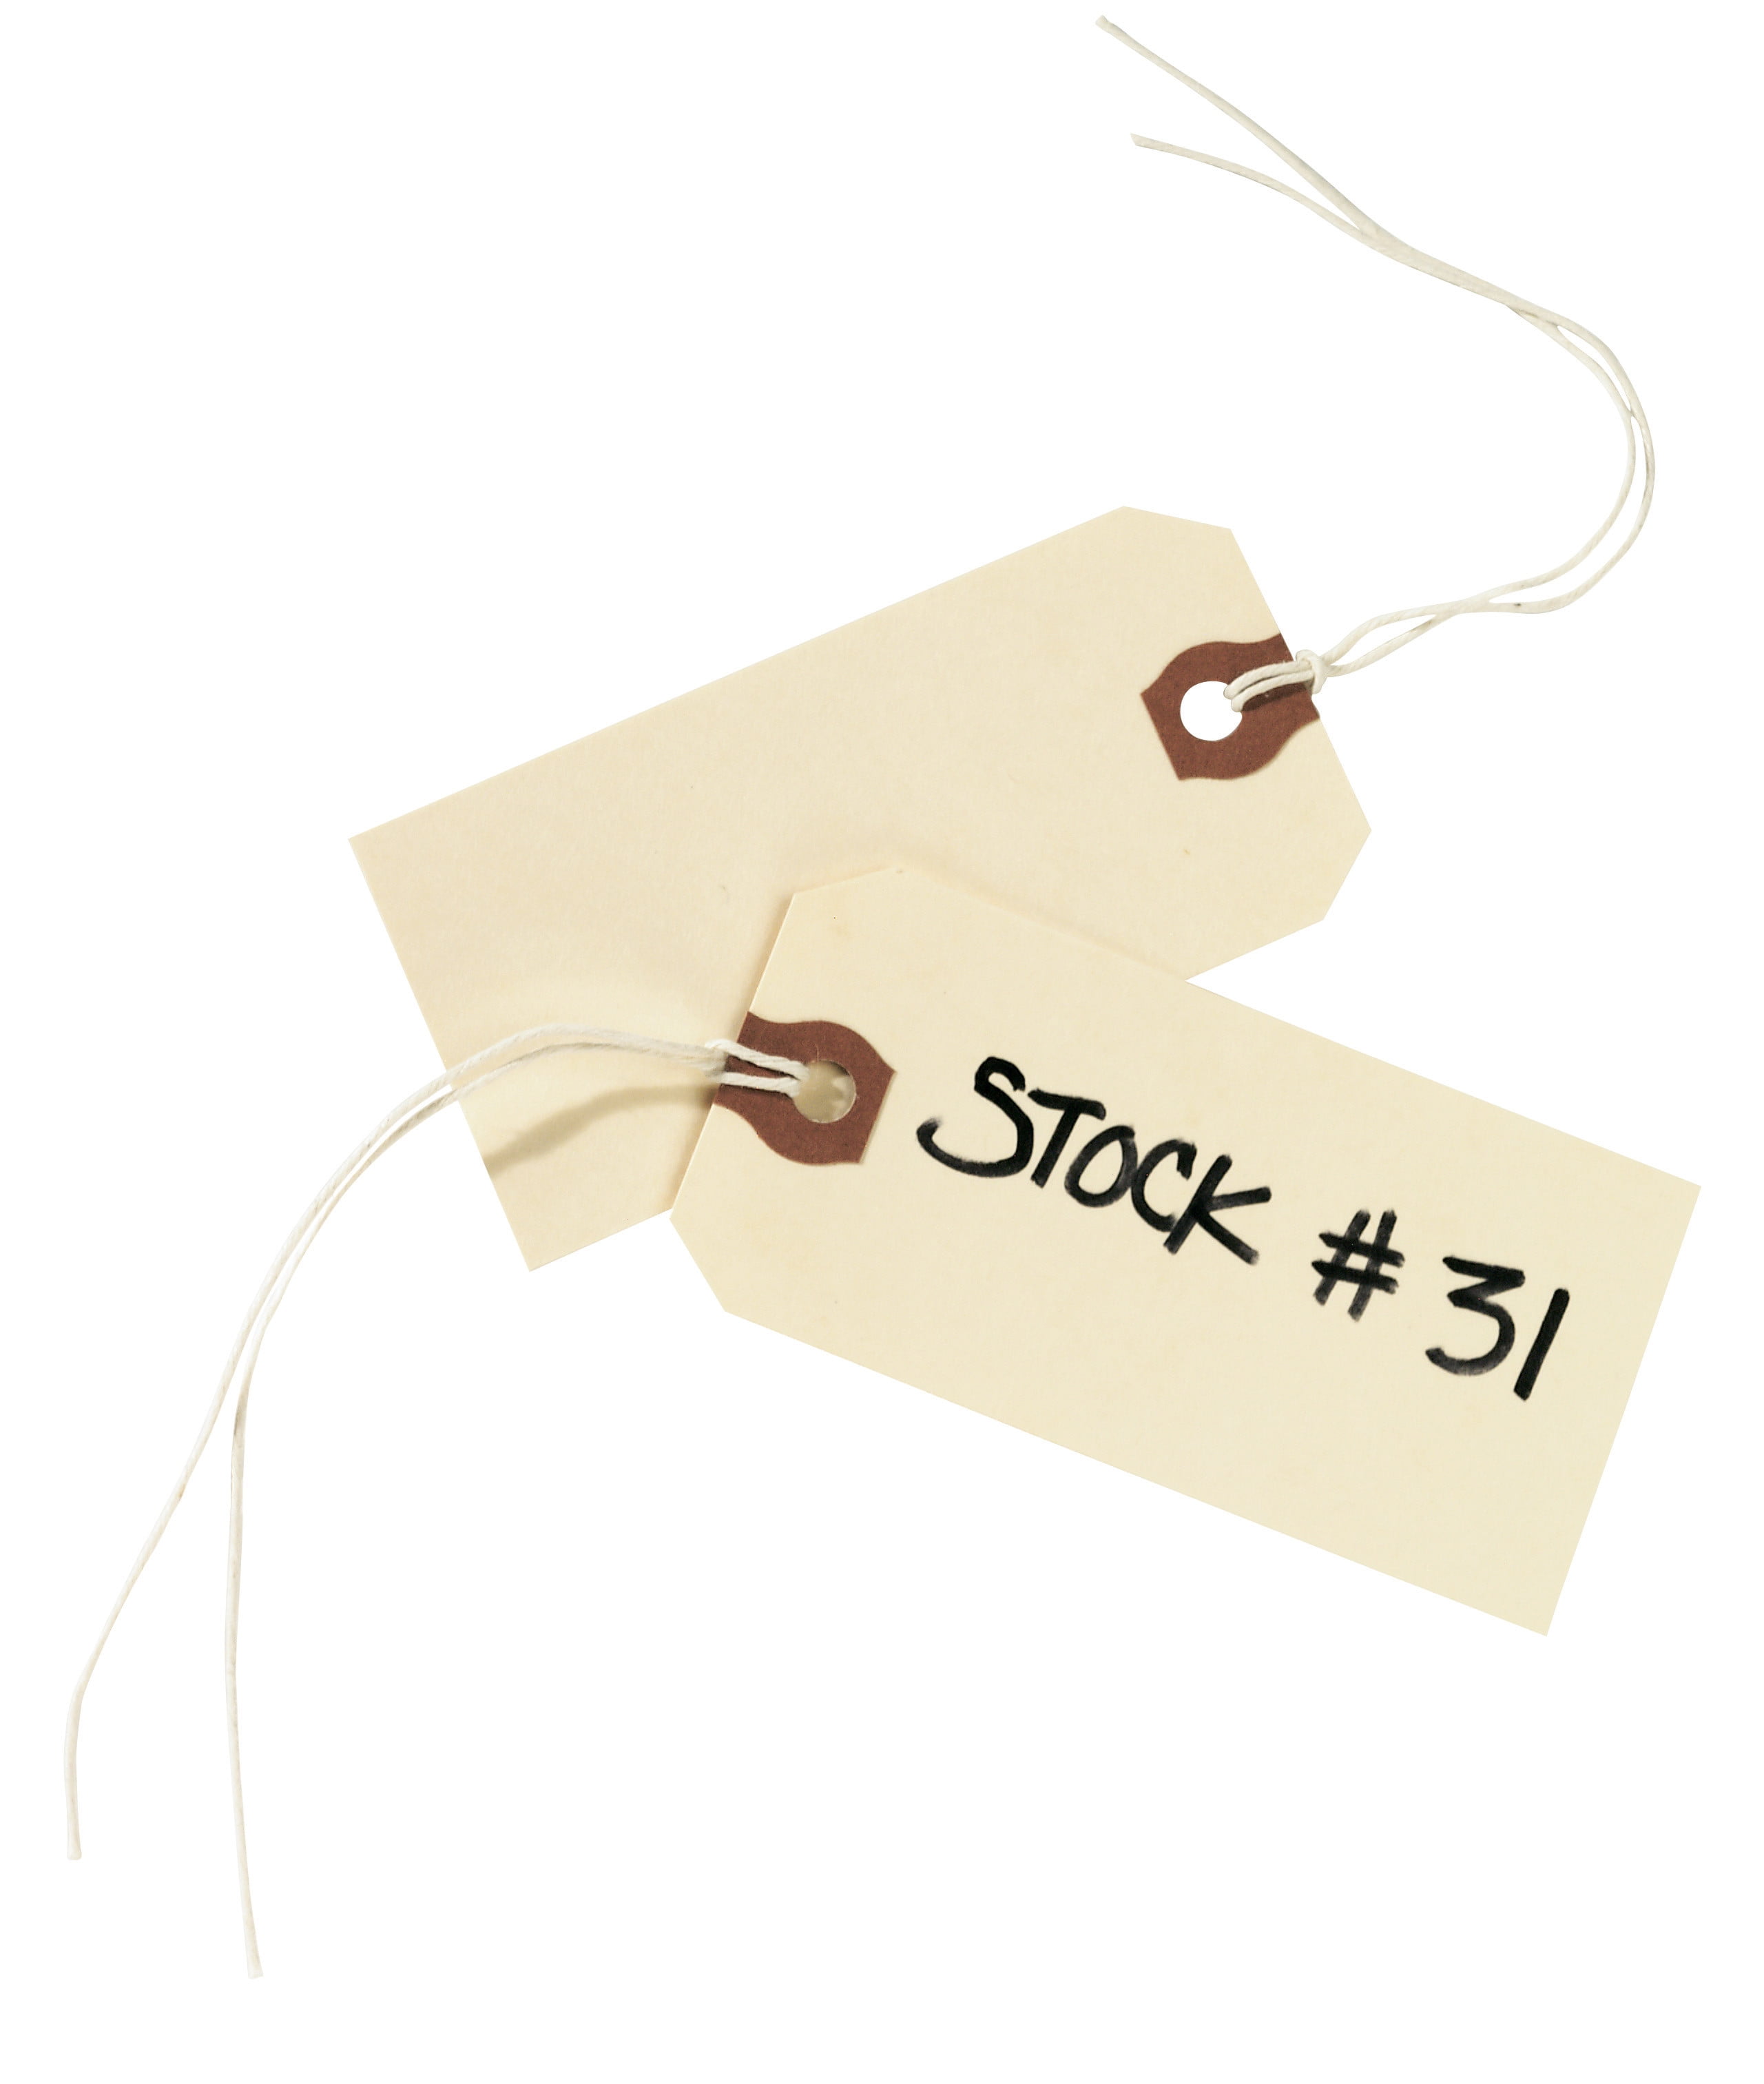  180 Pcs Blank Hang Tags with Wire Attached, 4 3/4 x 2